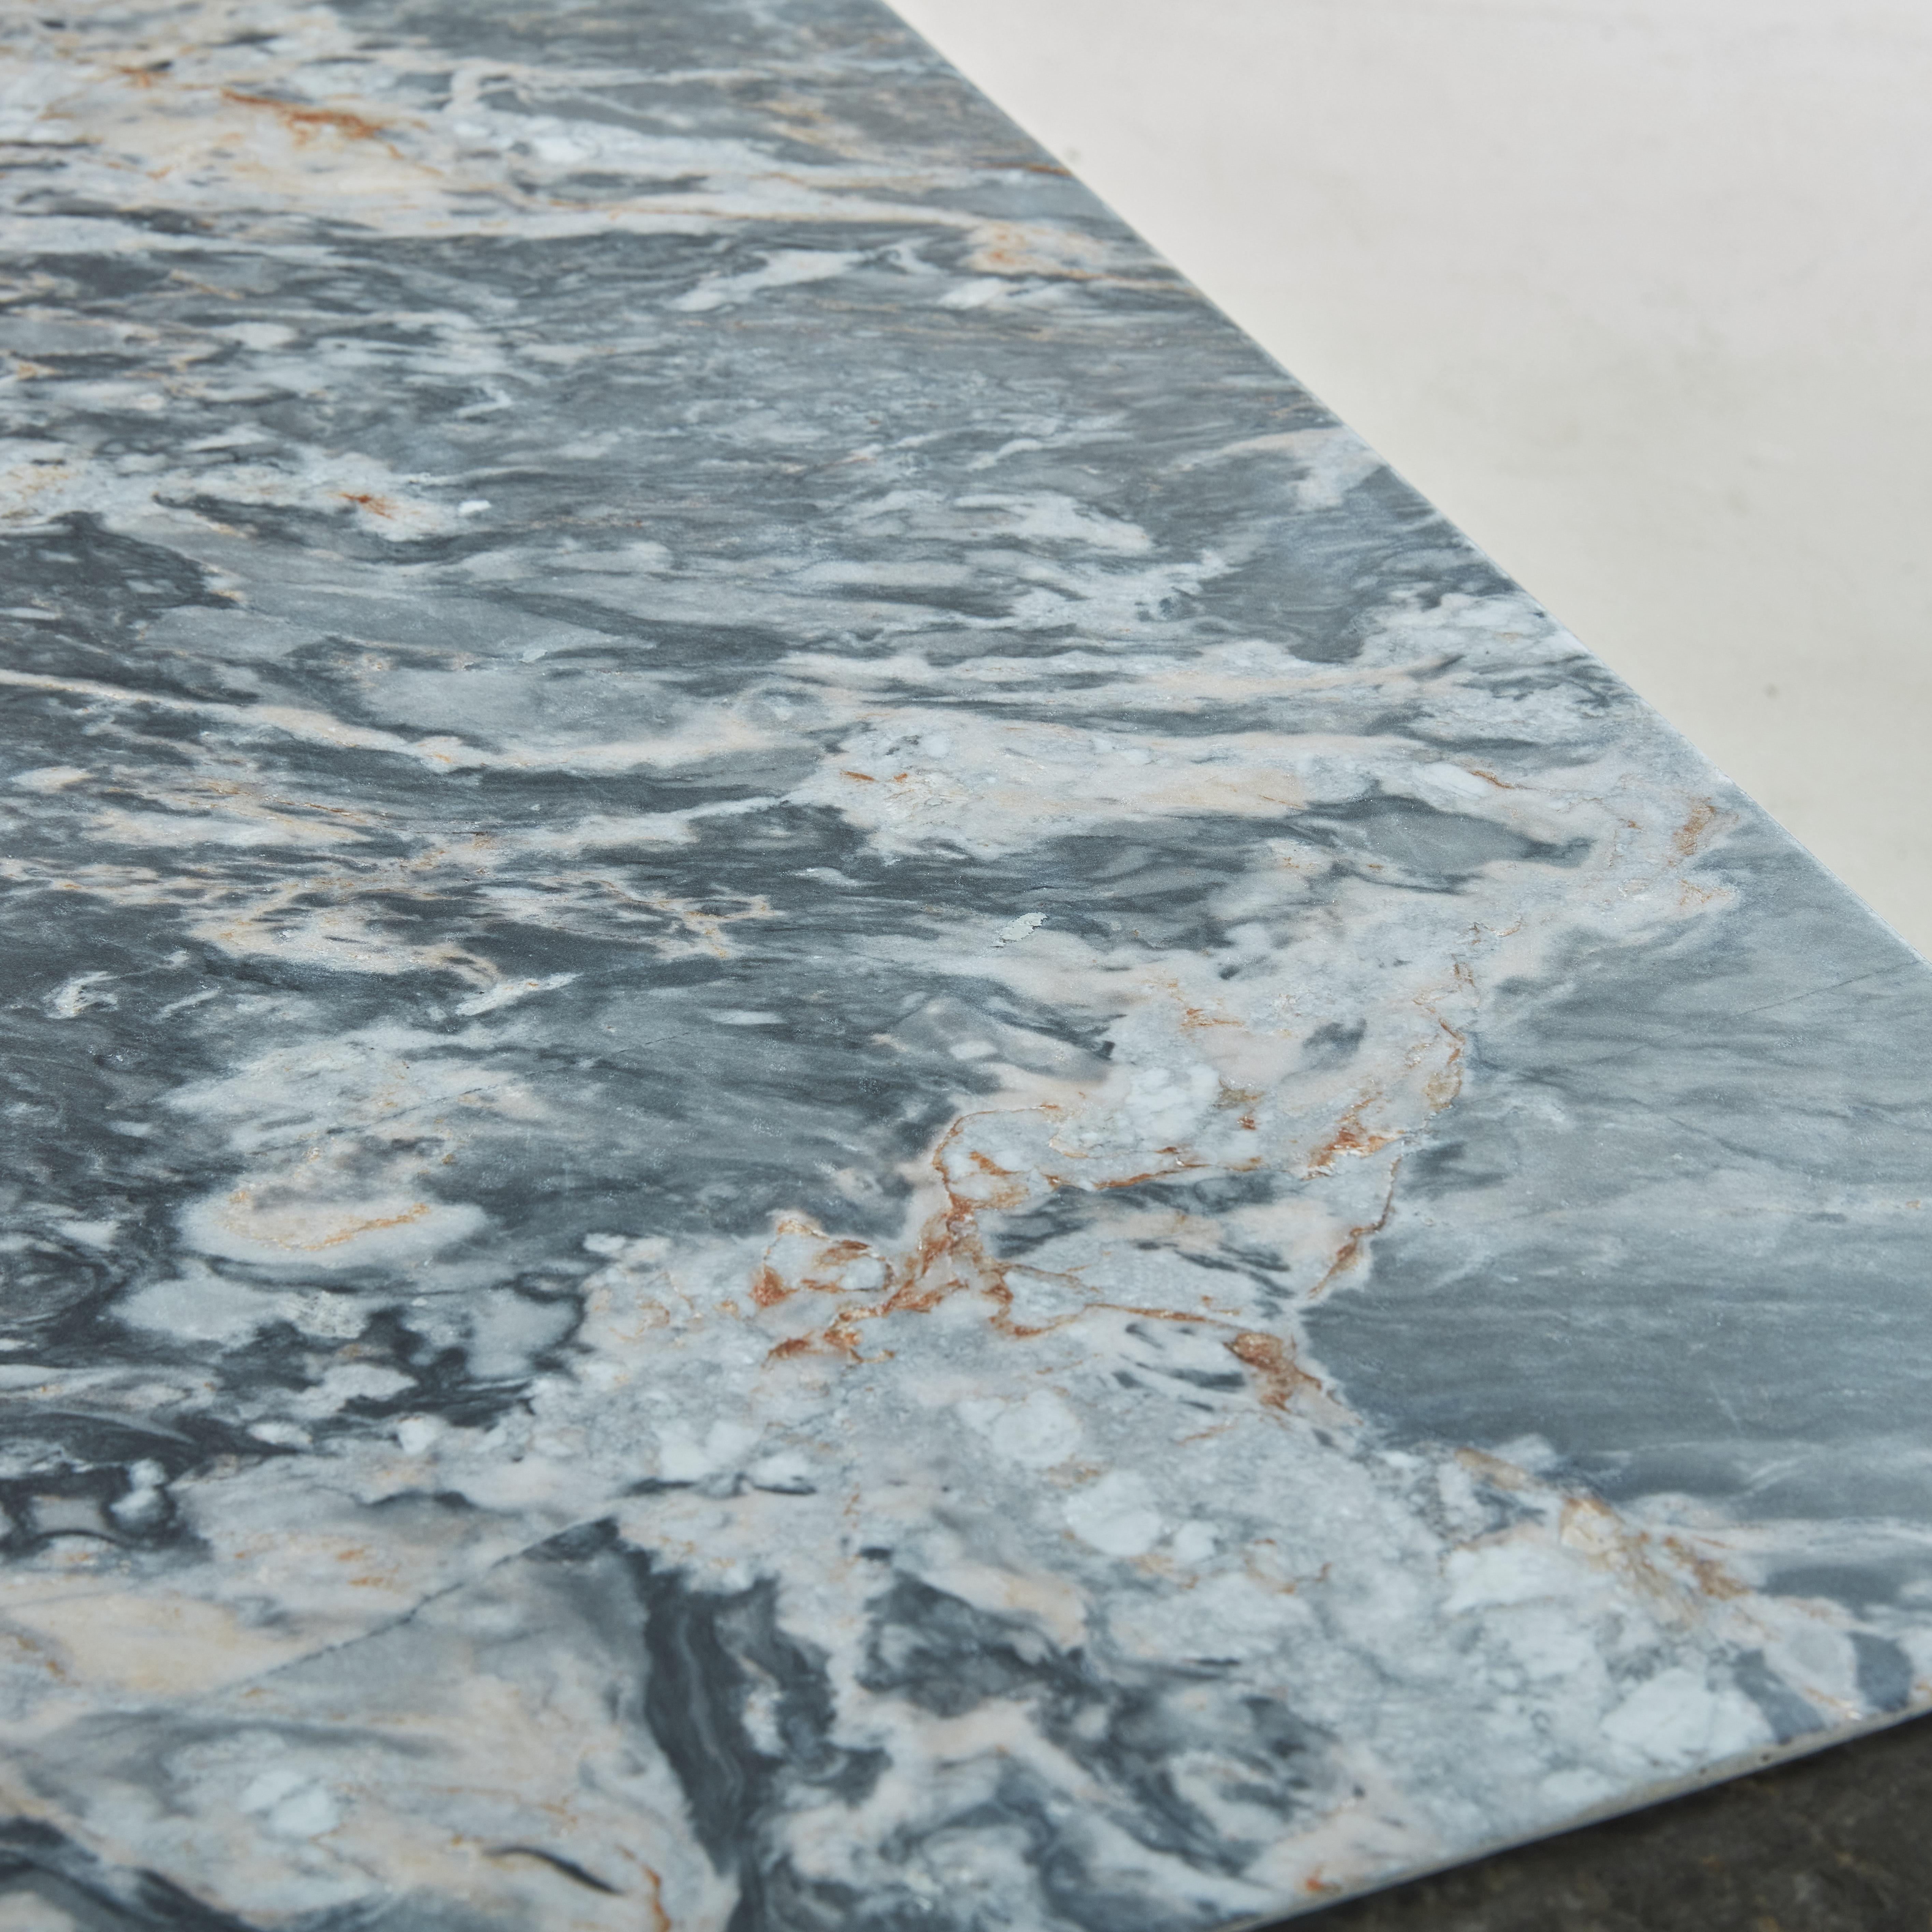 A striking 1970s coffee table constructed entirely of Italian Cipollino marble with beautiful gray, beige and pink hues. It has a honed finish and a minimalist silhouette, which is enhanced by the unique veining on this precious stone. Sourced in